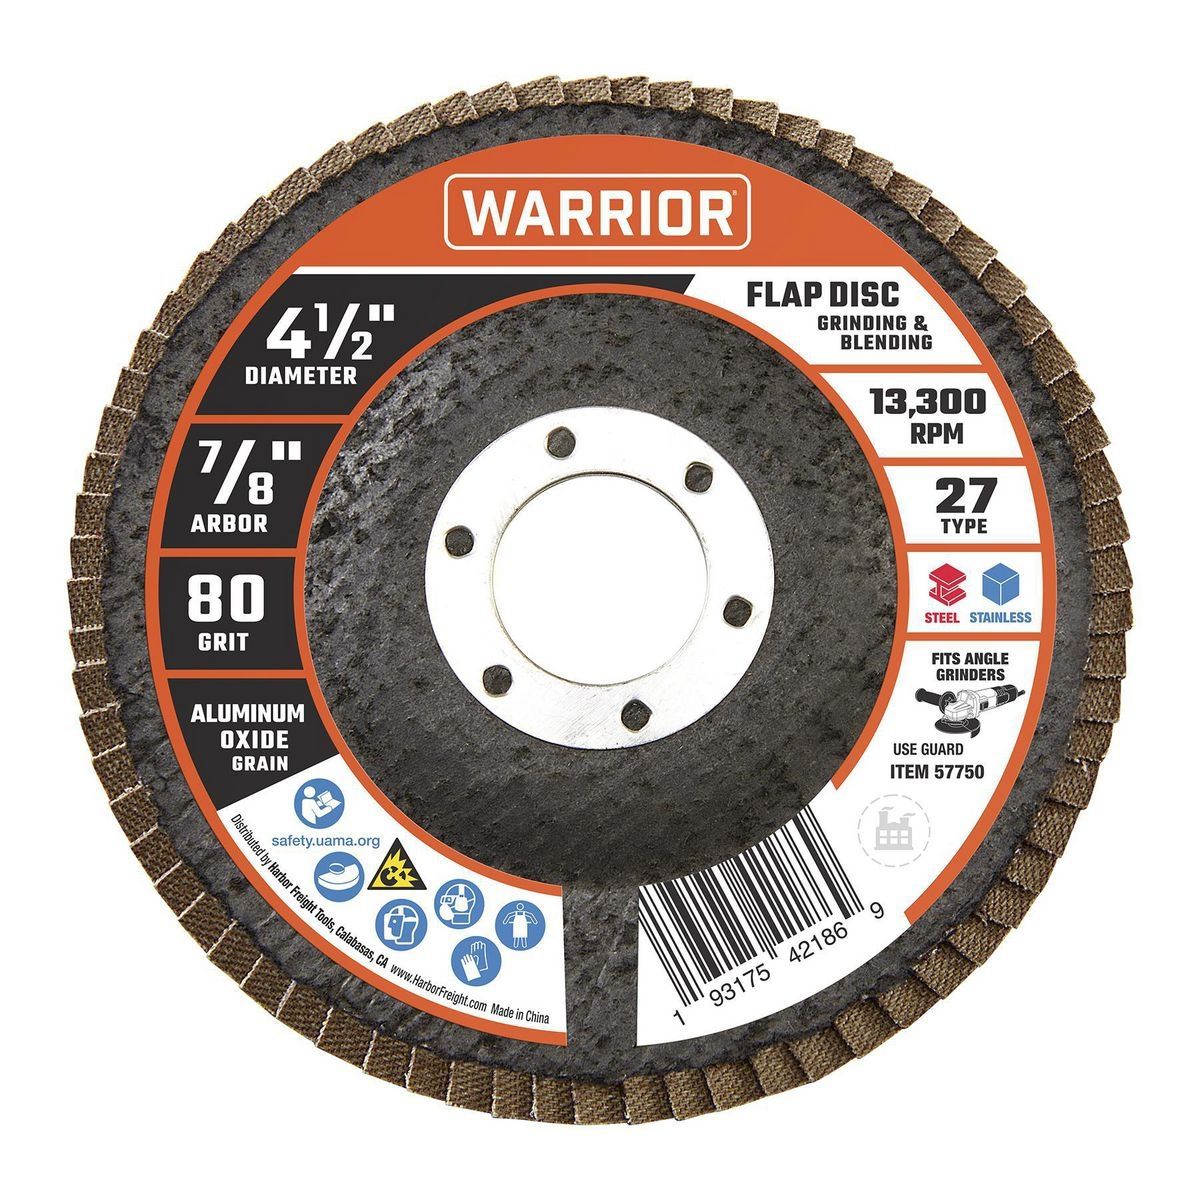 WARRIOR 4-1/2 in. x 7/8 in. 80-Grit Type 27 Flap Disc with Fiberglass Backing and Aluminum oxide Grain